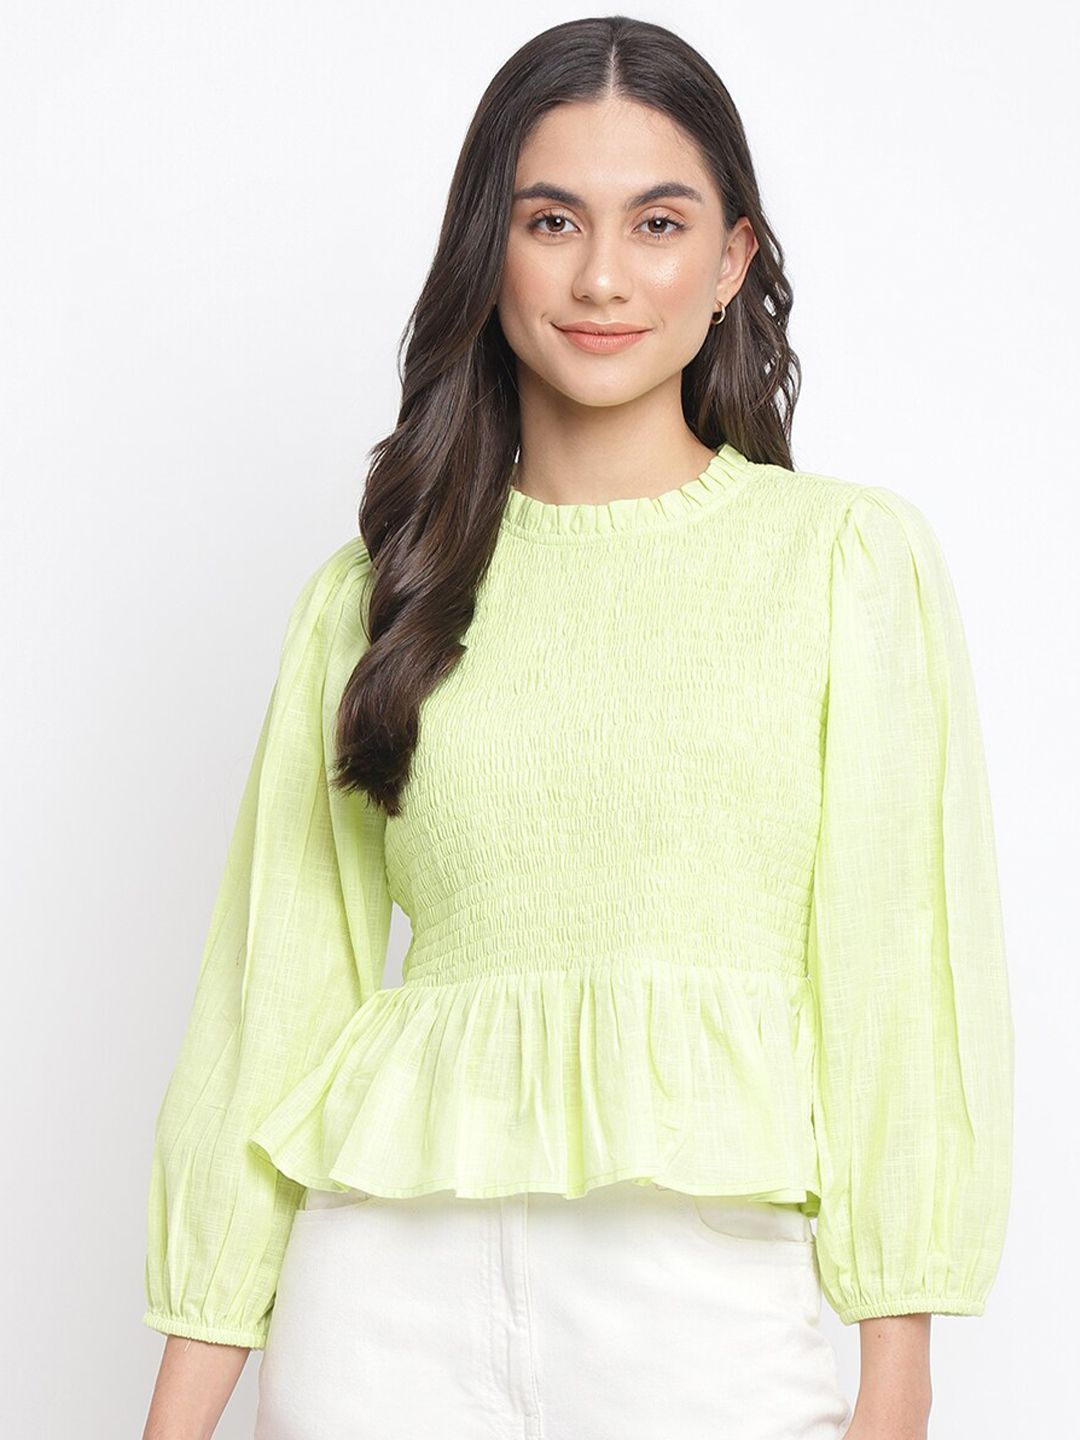 Fabindia Women Green Pure Cotton Solid Smocked Top Price in India